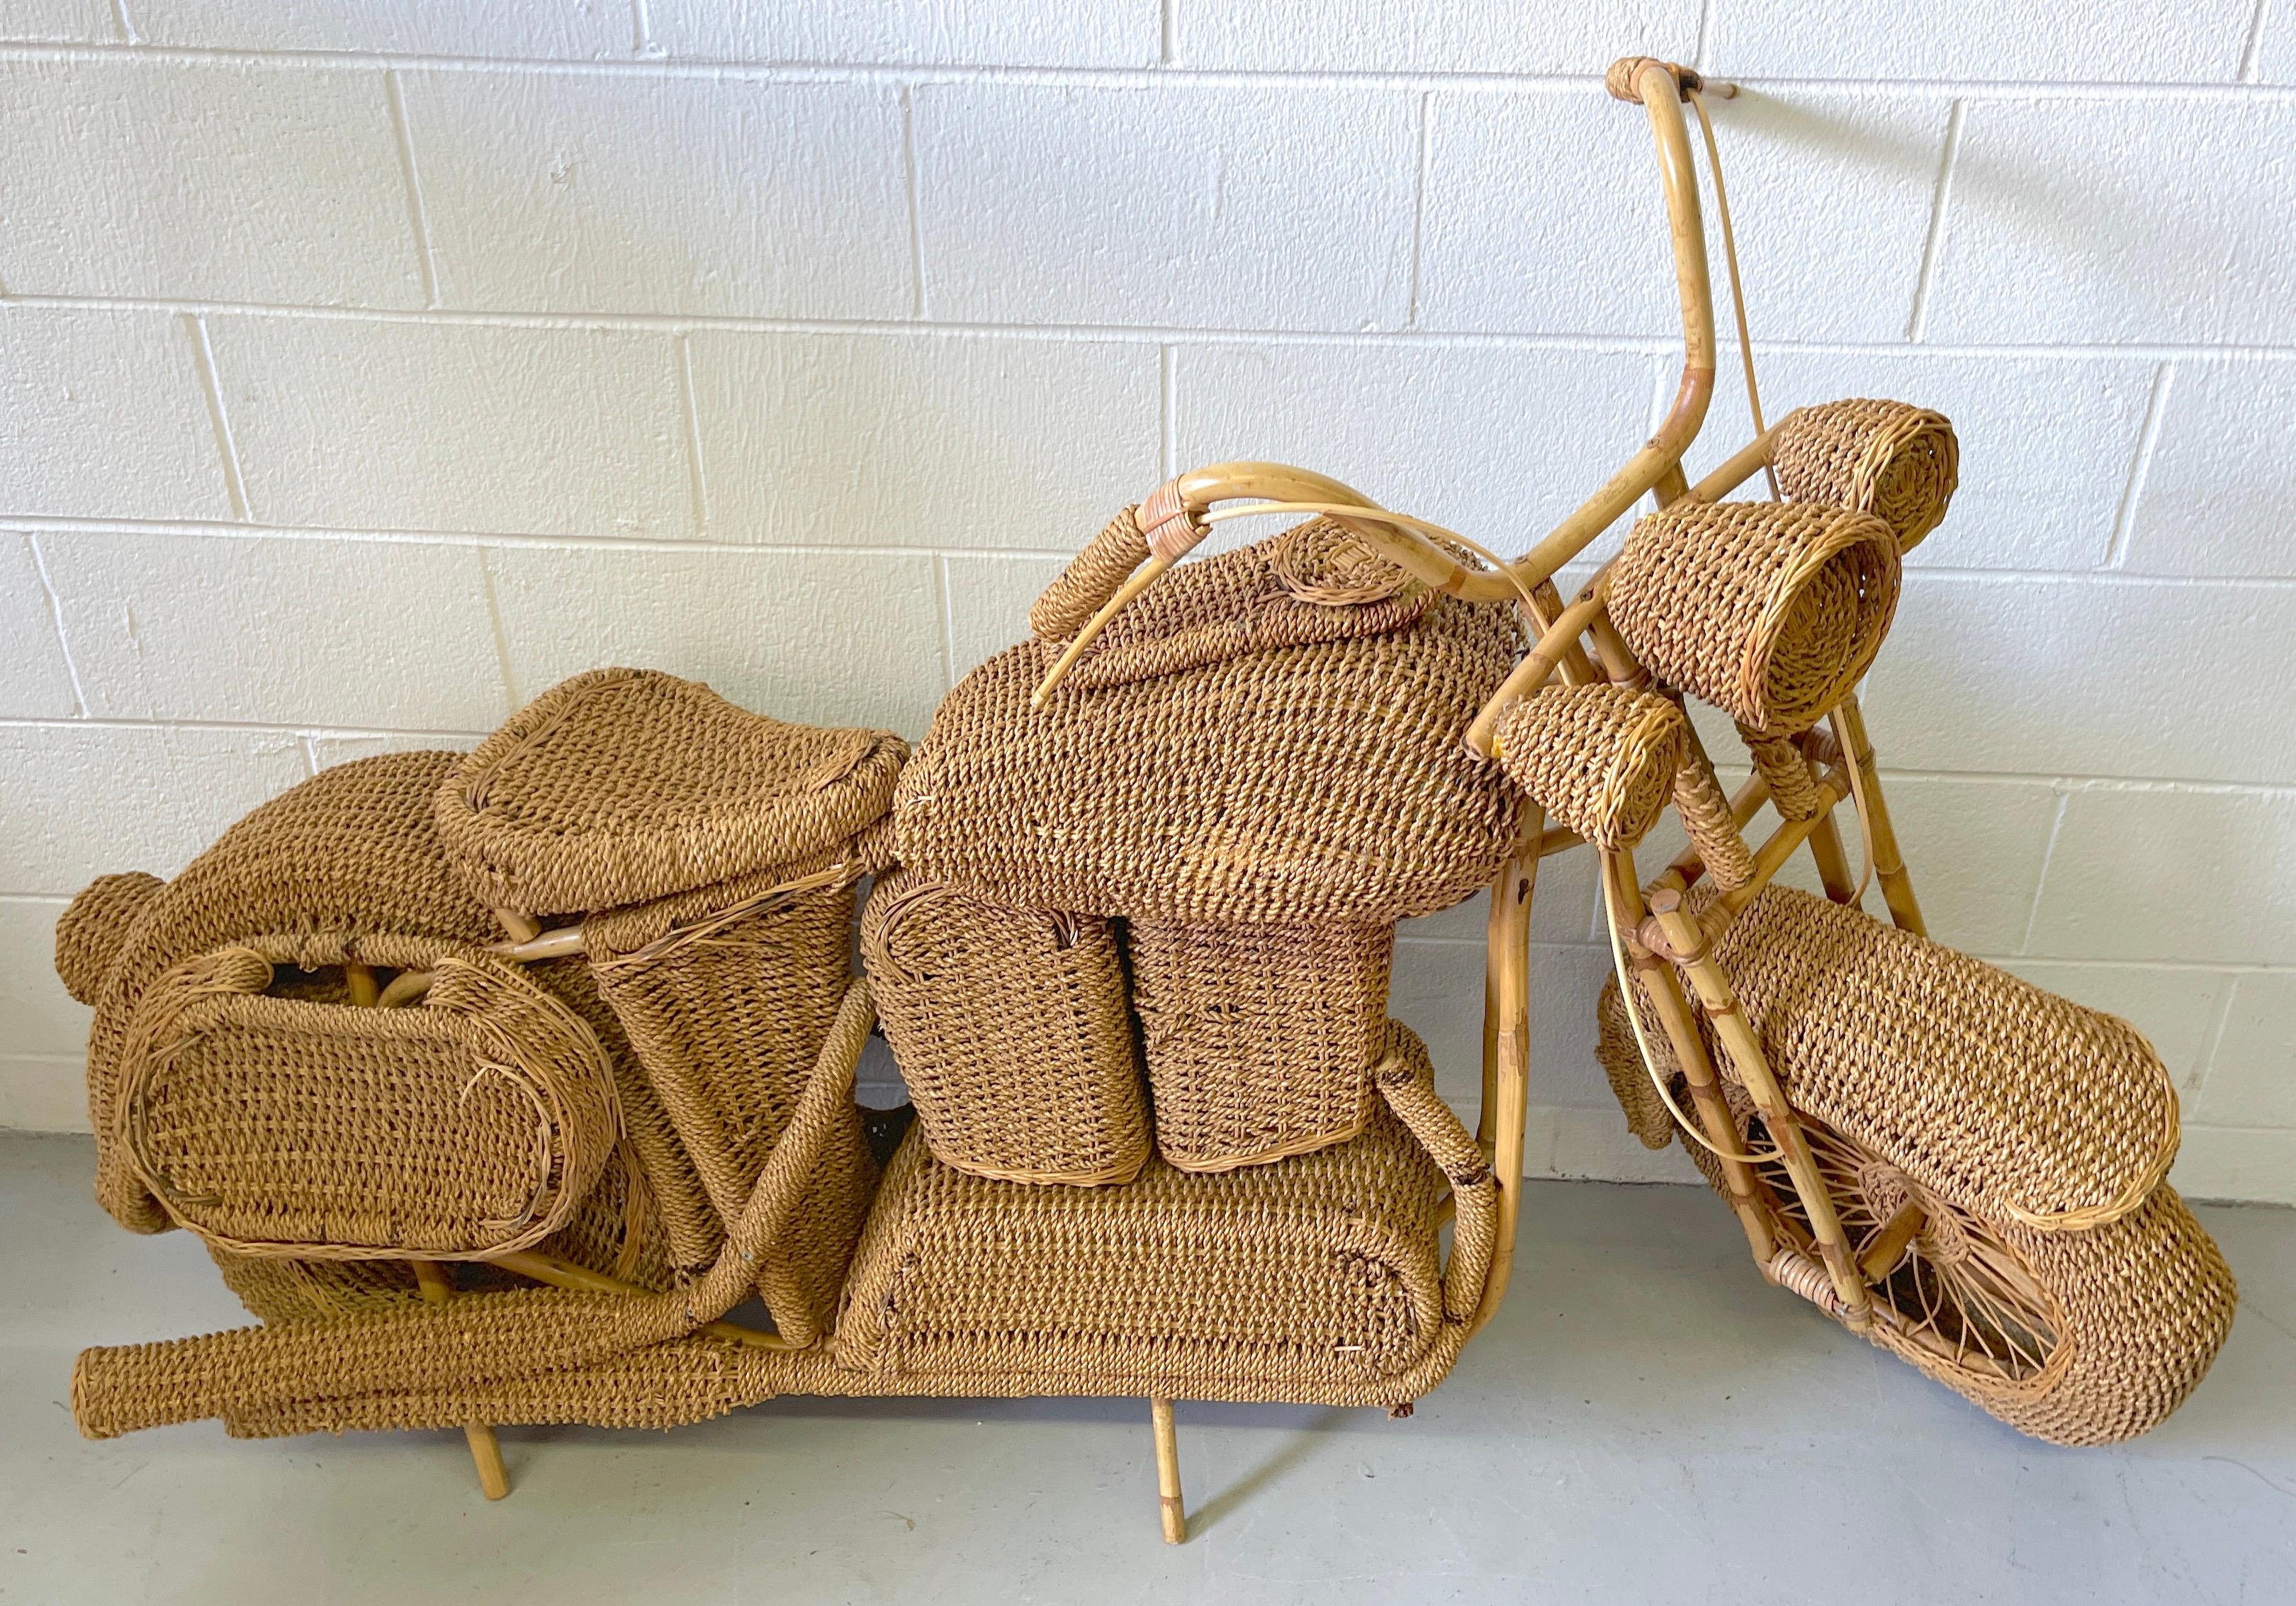 Life Size Harley Davidson Rattan Model of a Motorcycle, Attributed to Tom Dixon For Sale 4